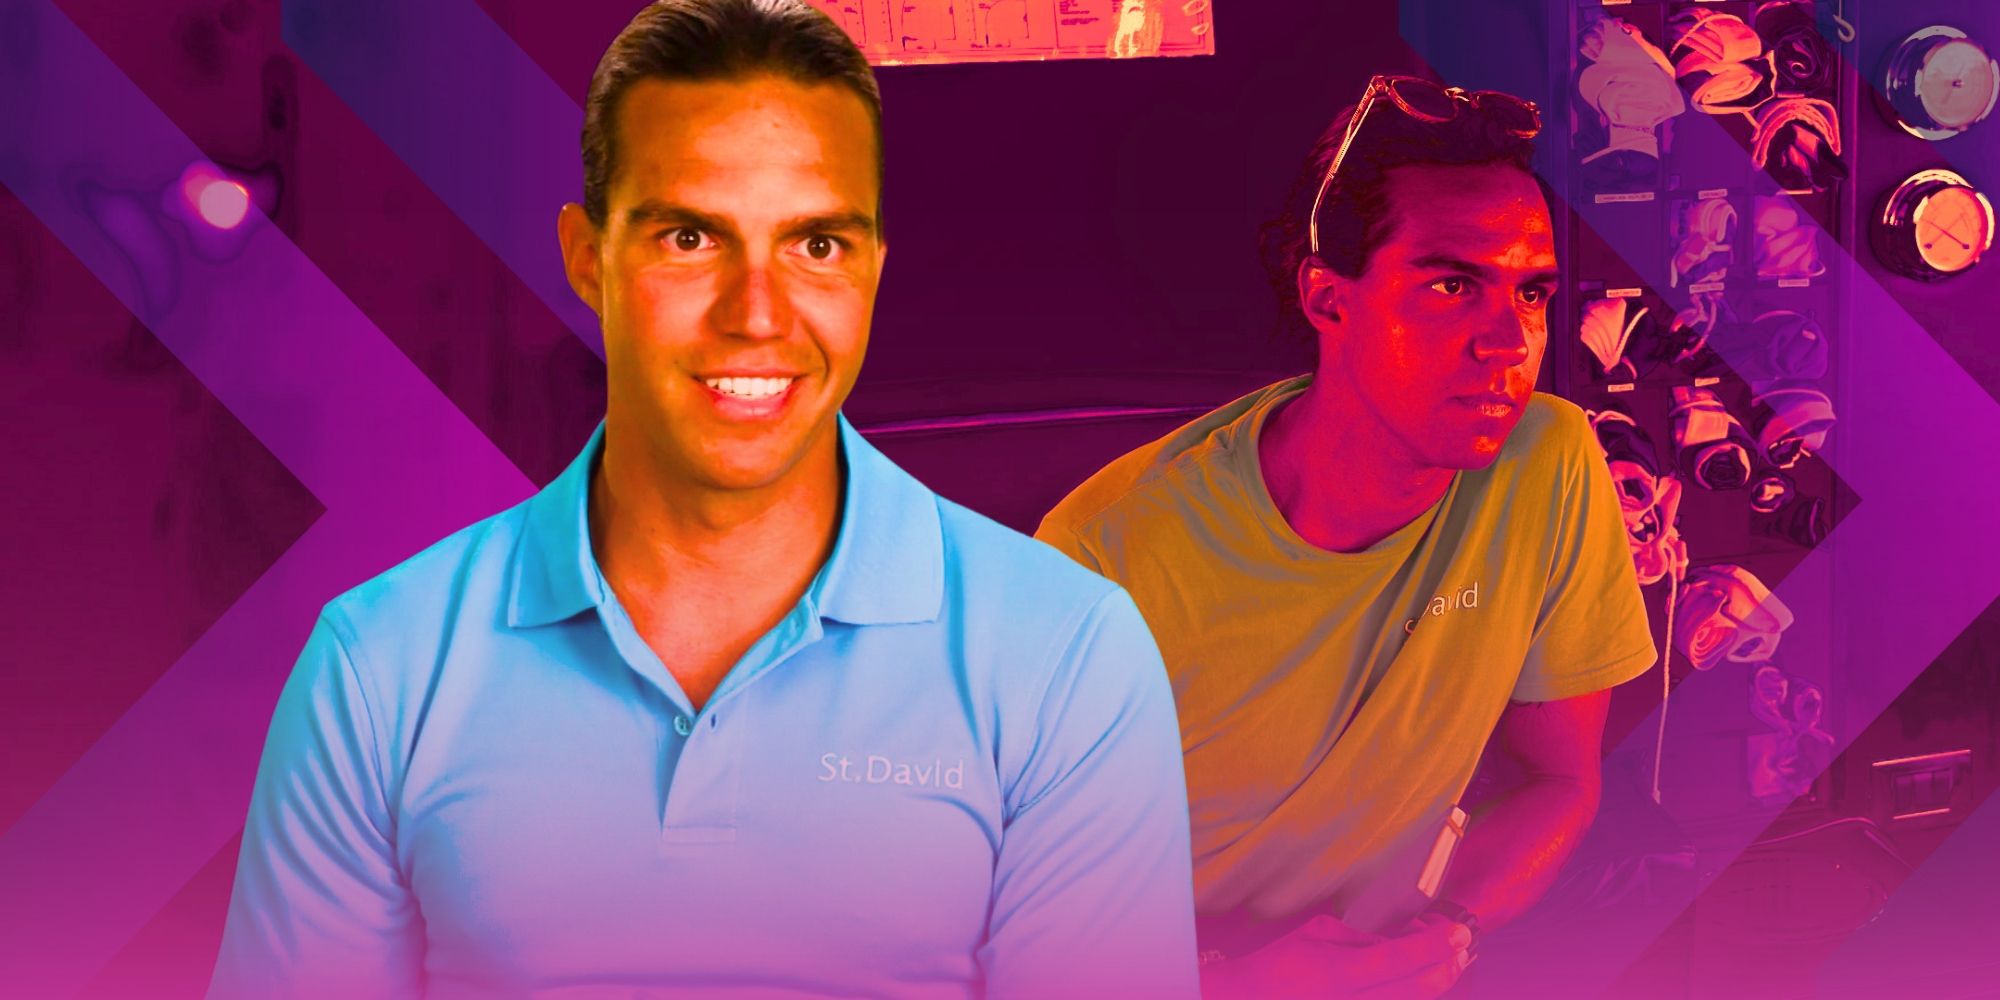  Ben Willoughby below deck montage blue polo in front green tshirt in back purple arrows and filter pointing right